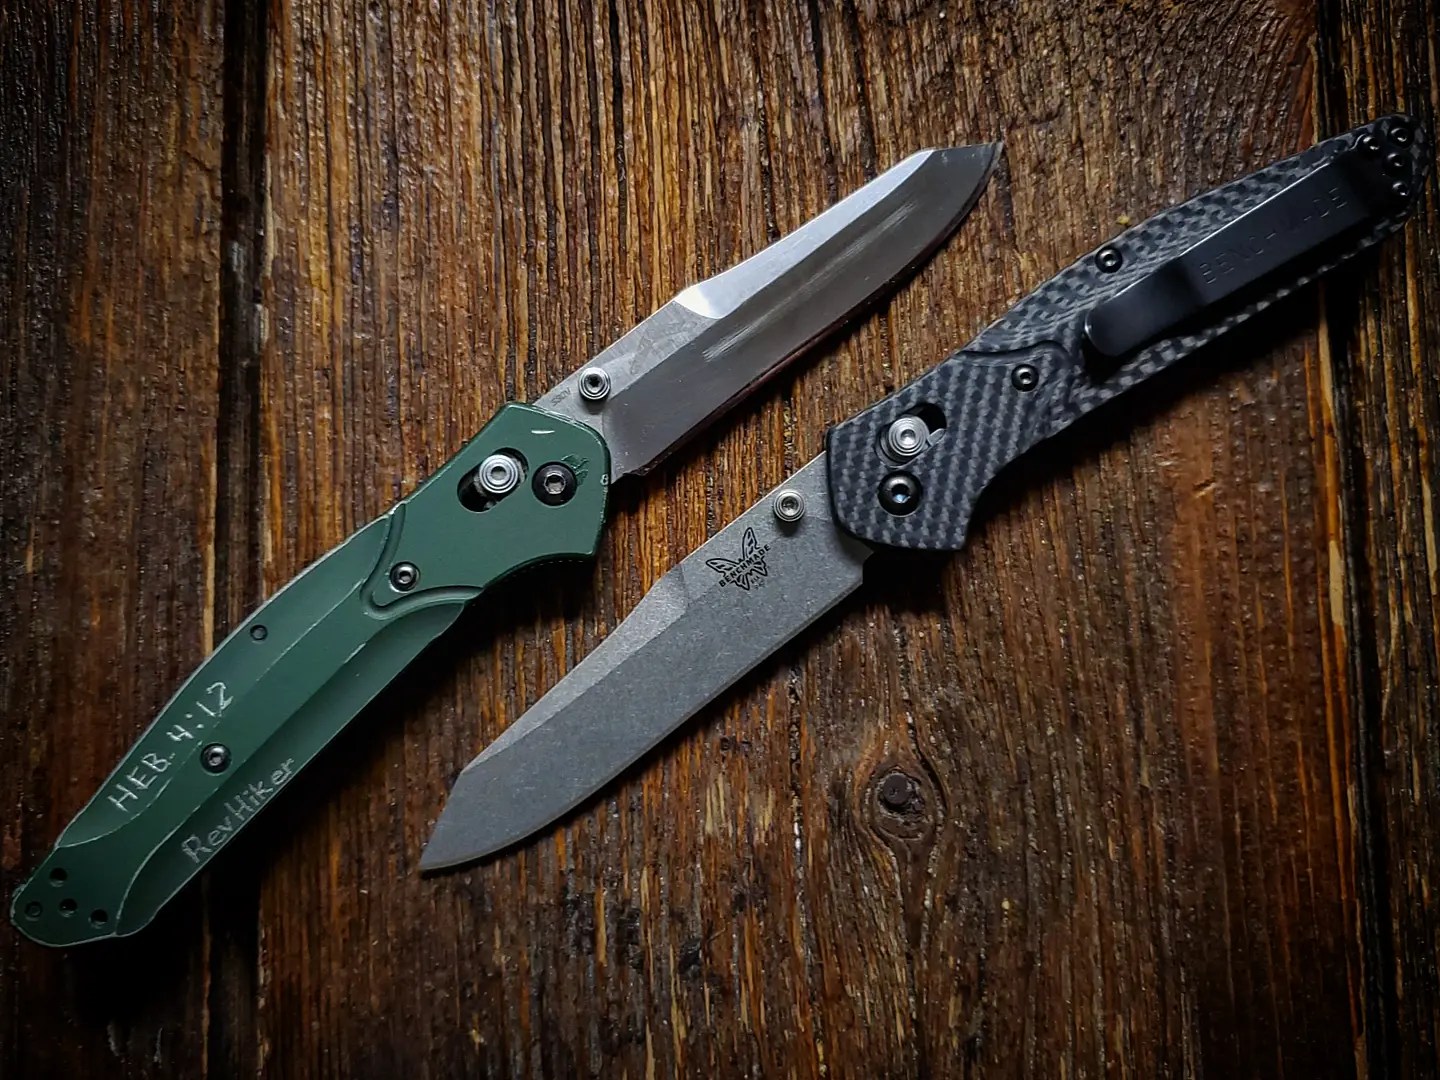 Benchmade 940 Review: The Ultimate EDC Knife Put to the Test